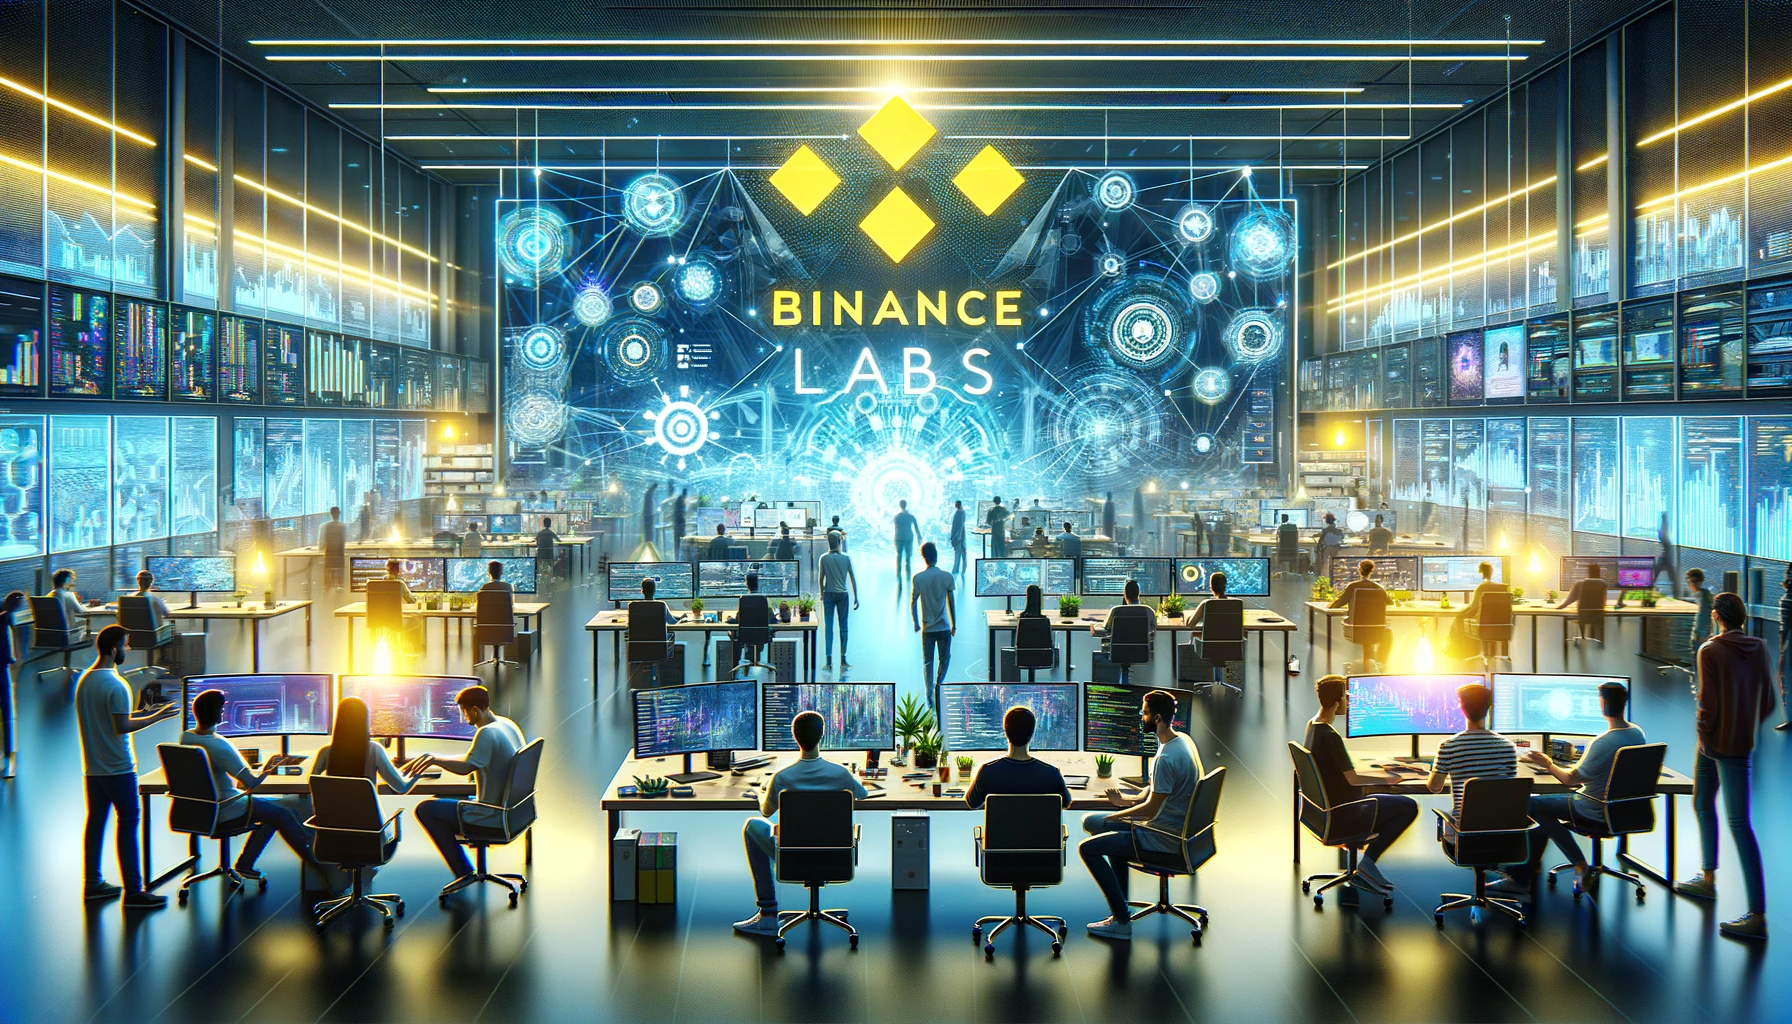 Binance Labs - an incubator for developing Web3 and blockchain innovation opportunities - news